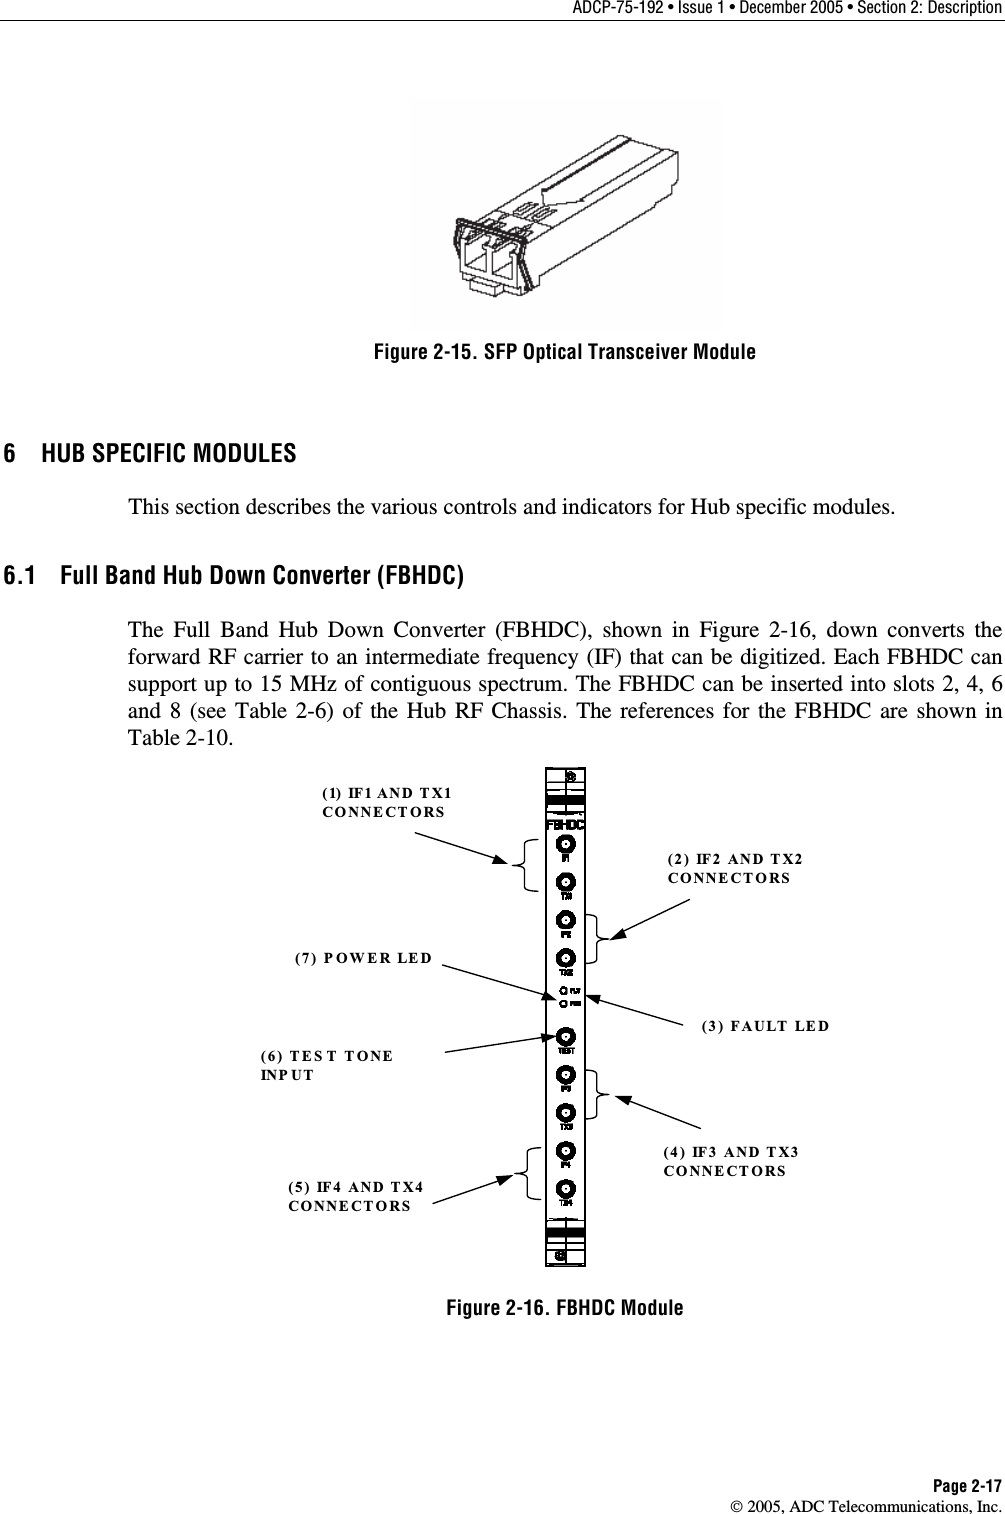 ADCP-75-192 • Issue 1 • December 2005 • Section 2: Description Page 2-17  2005, ADC Telecommunications, Inc.  Figure 2-15. SFP Optical Transceiver Module 6  HUB SPECIFIC MODULES This section describes the various controls and indicators for Hub specific modules. 6.1  Full Band Hub Down Converter (FBHDC) The Full Band Hub Down Converter (FBHDC), shown in Figure 2-16, down converts the forward RF carrier to an intermediate frequency (IF) that can be digitized. Each FBHDC can support up to 15 MHz of contiguous spectrum. The FBHDC can be inserted into slots 2, 4, 6 and 8 (see Table 2-6) of the Hub RF Chassis. The references for the FBHDC are shown in Table 2-10.  (3) FAULT LED(7) P OWER LED(2) IF2 AND TX2 CONNECTORS(1) IF1 AND TX1 CONNECTORS(4) IF3 AND TX3 CONNECTORS(5) IF4 AND TX4 CONNECTORS(6) TEST TONE IN P U T Figure 2-16. FBHDC Module 